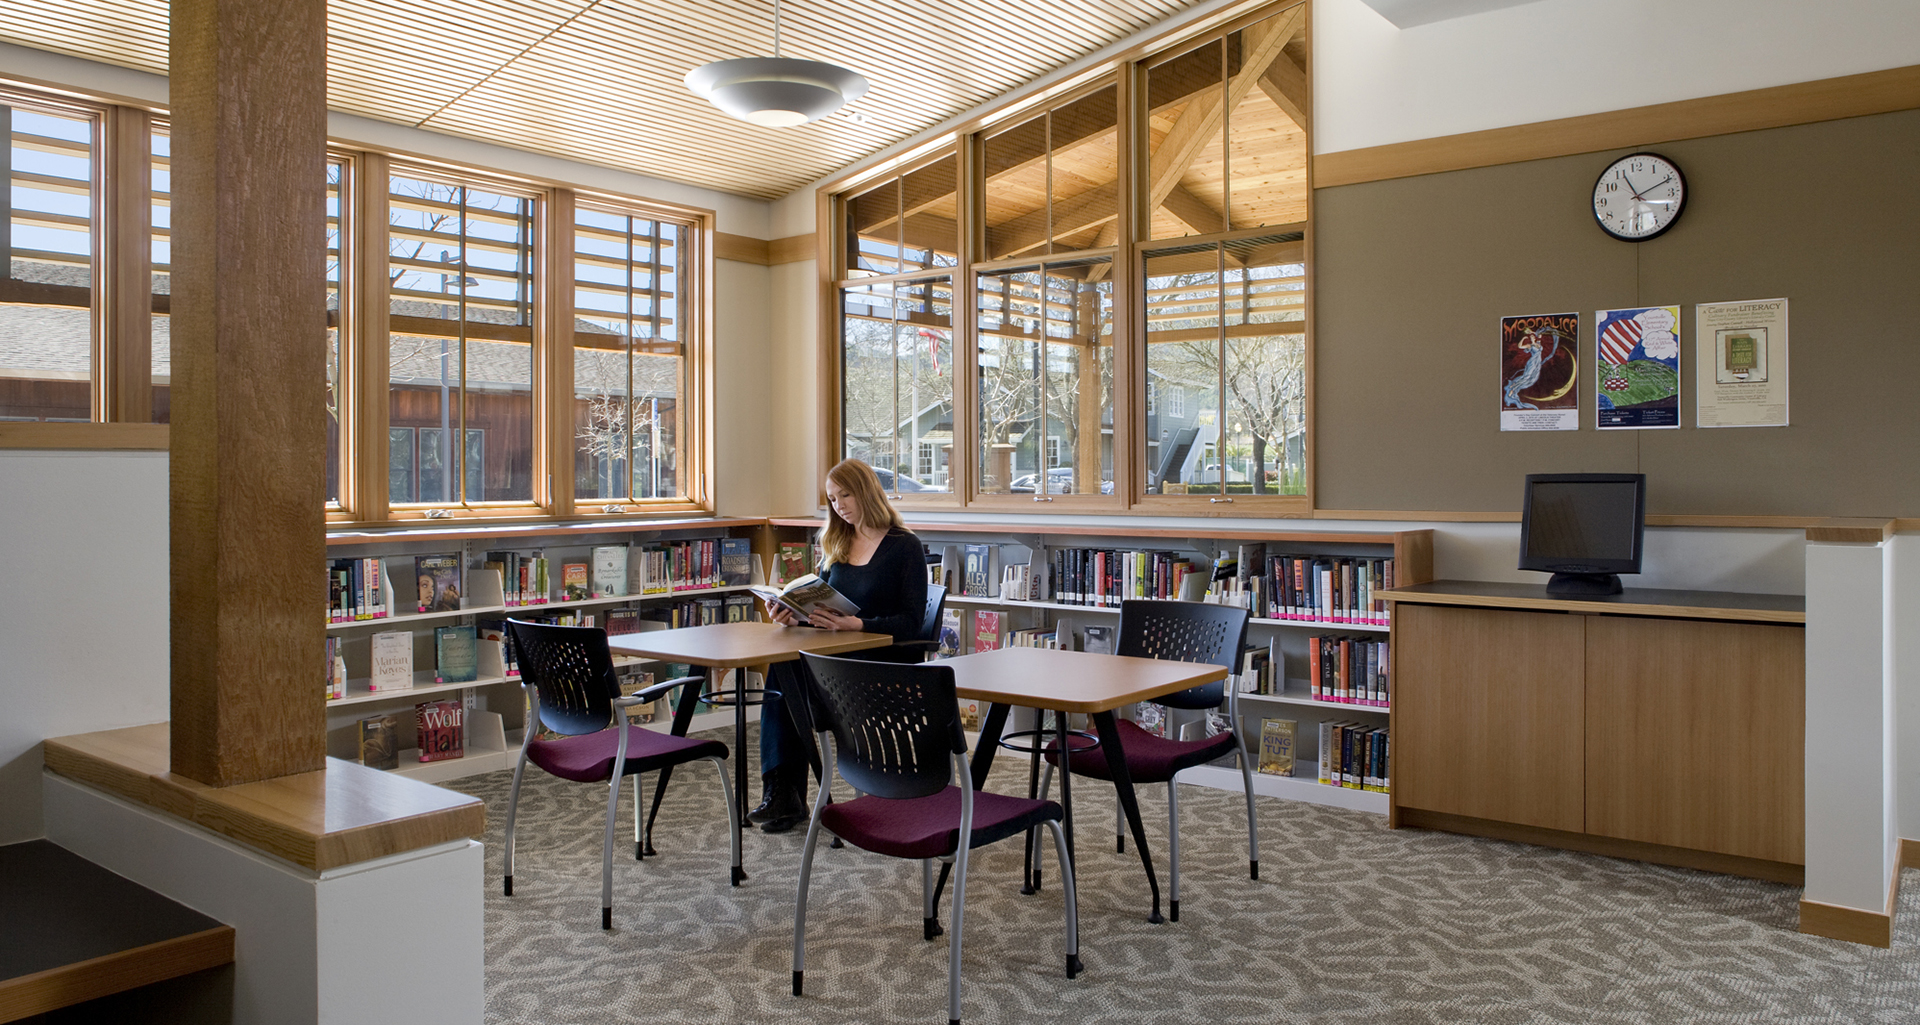 Yountville Town Center & Library | Photos by David Wakely